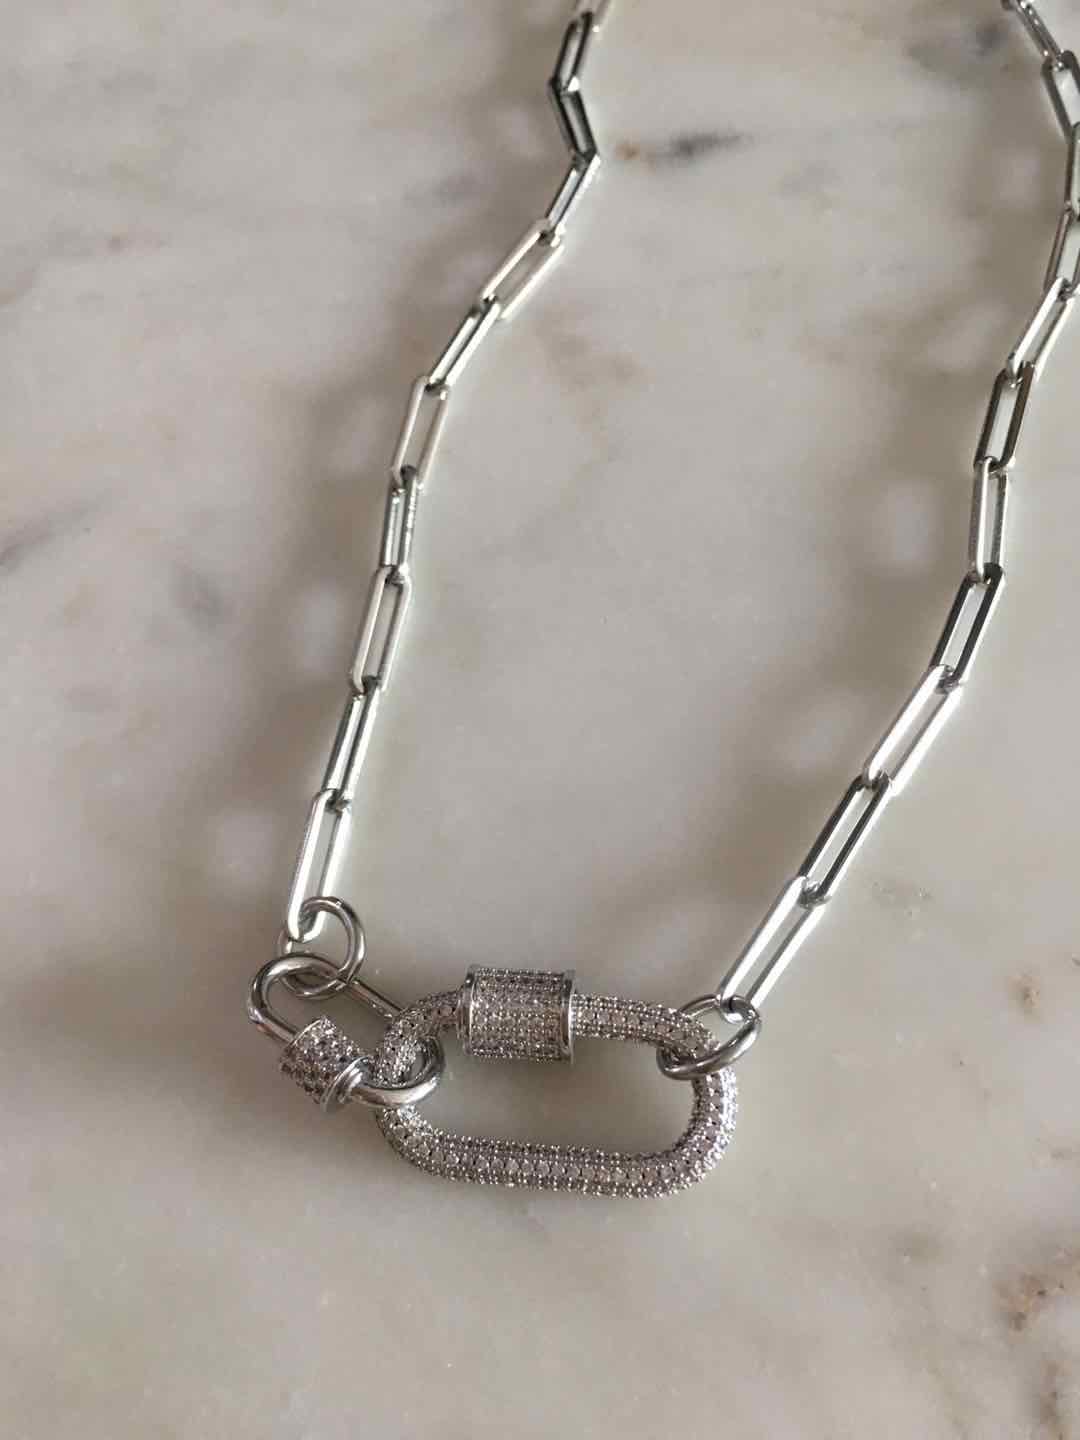 Shiloh chain with double oval lock pendant